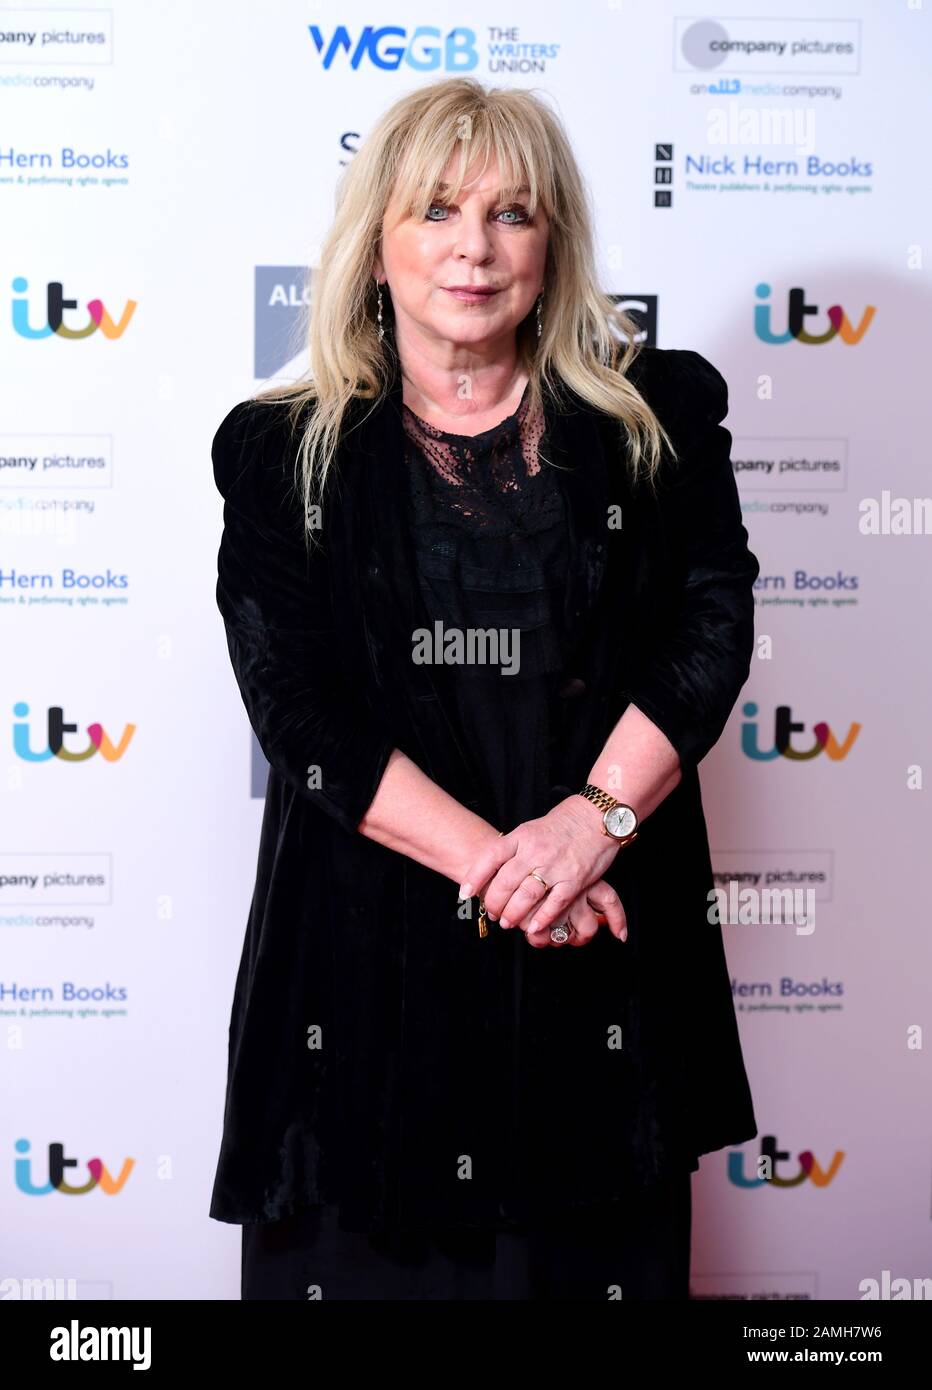 Helen Lederer arrives at The Writers' Guild Awards 2020 held at the Royal College of Physicians, London. Stock Photo